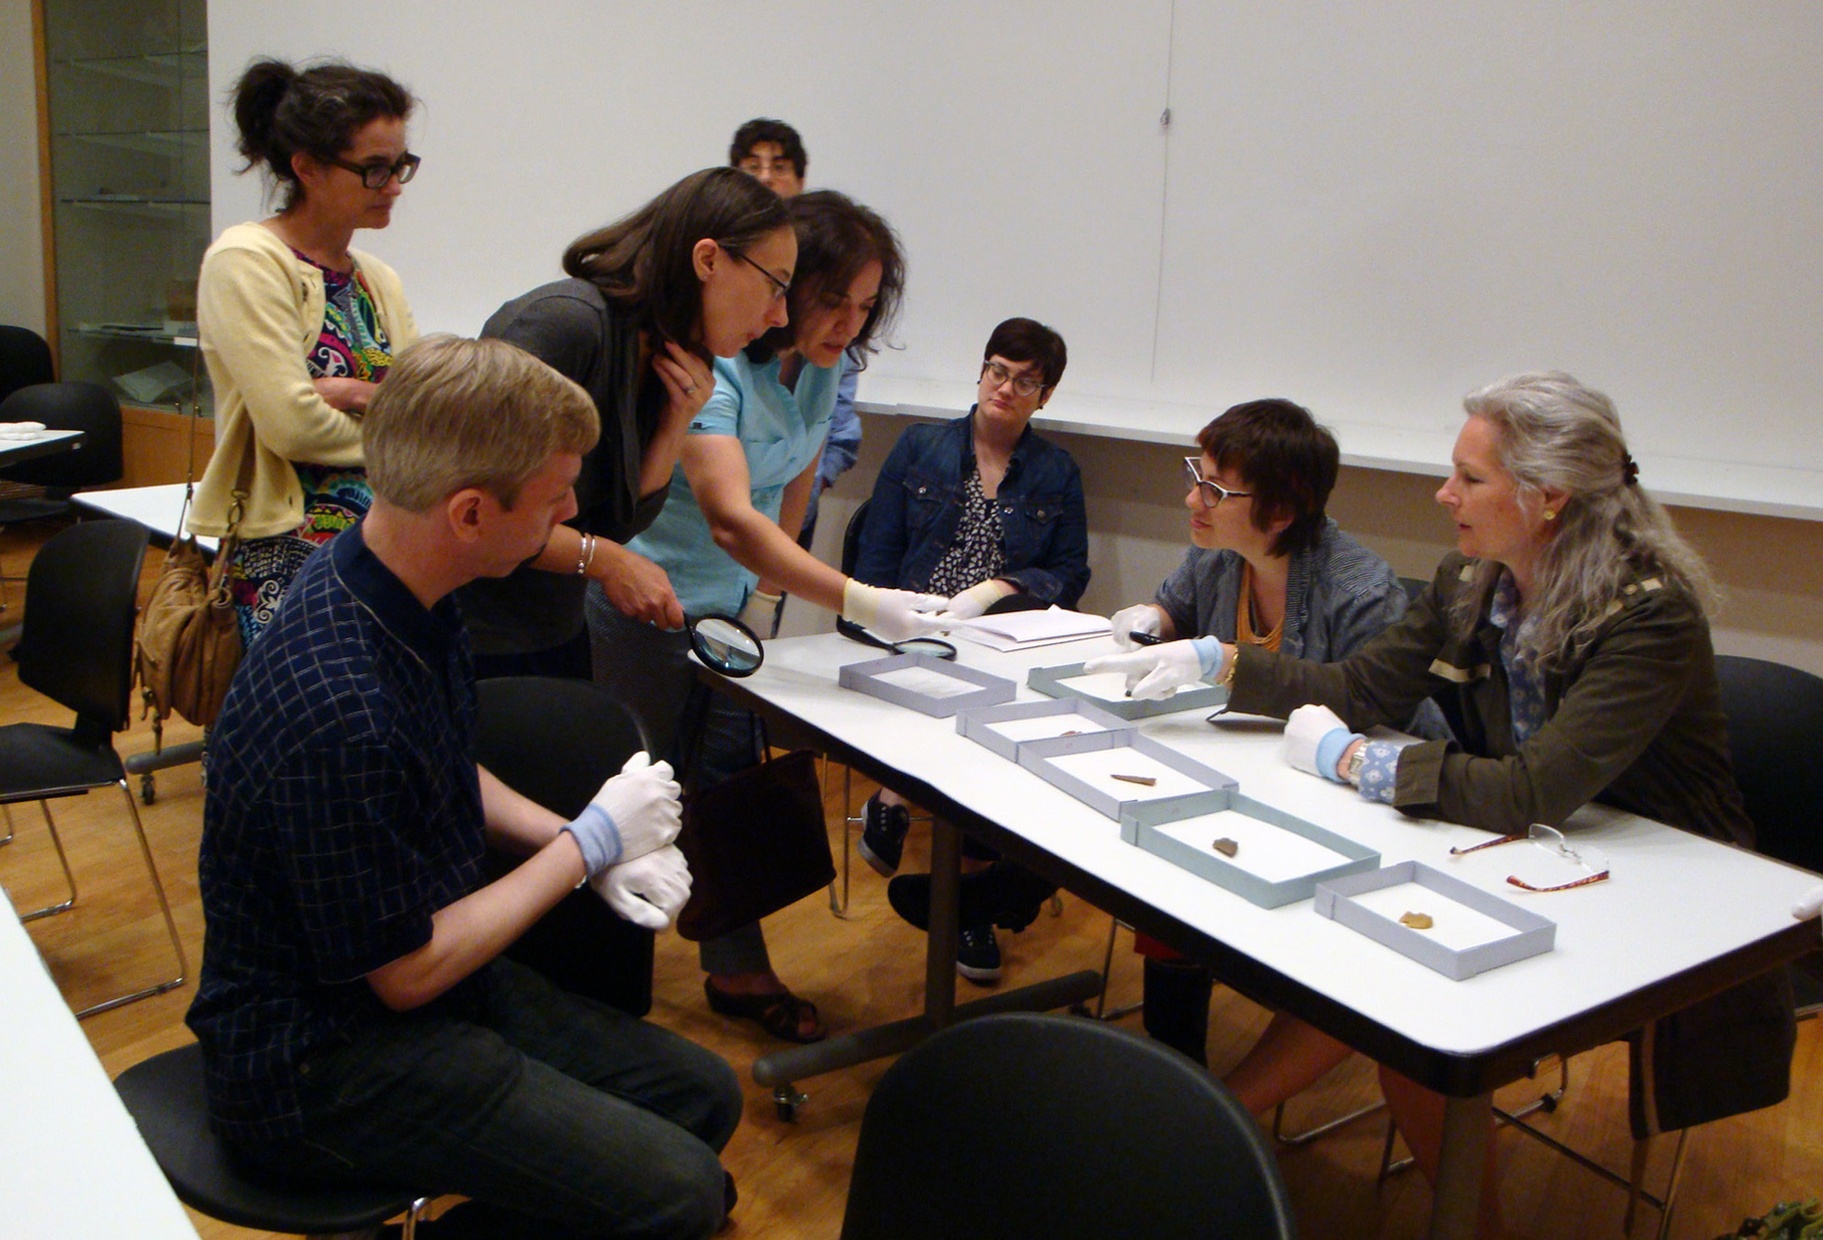 A group of people look at objects on a table top.